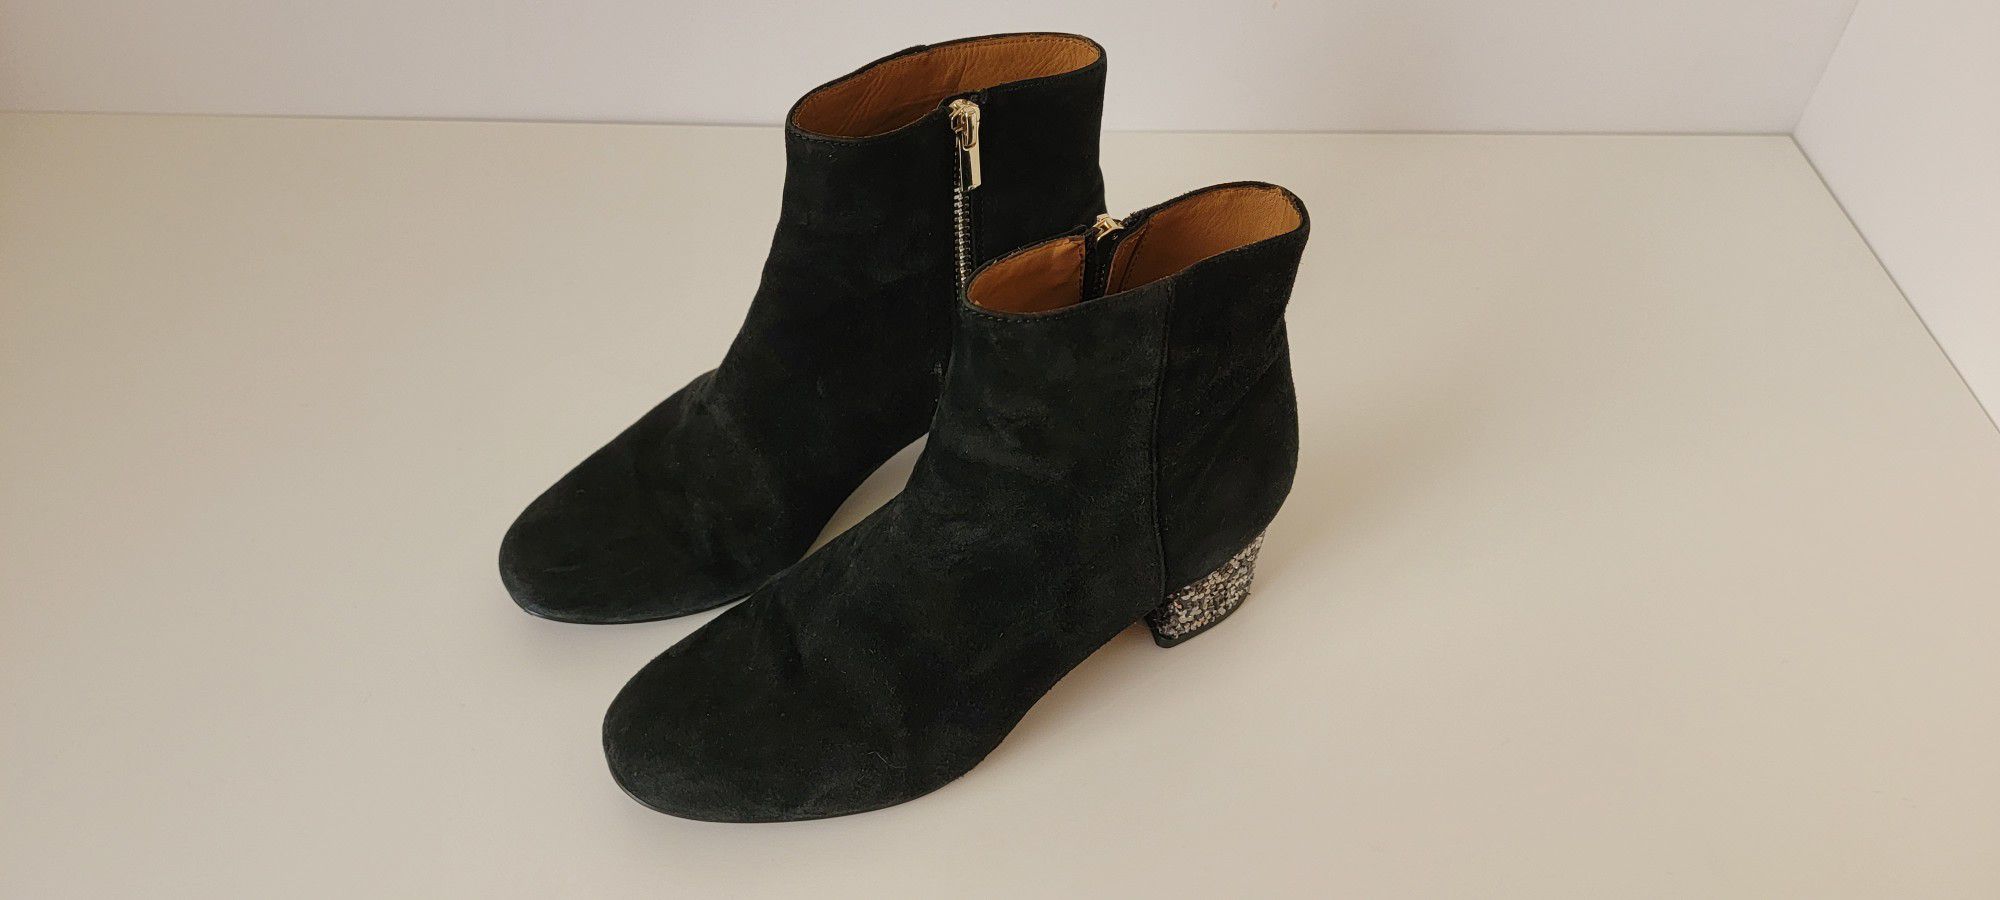 Black leather sparkly heel booties & Other Stories Size 7 / 37

